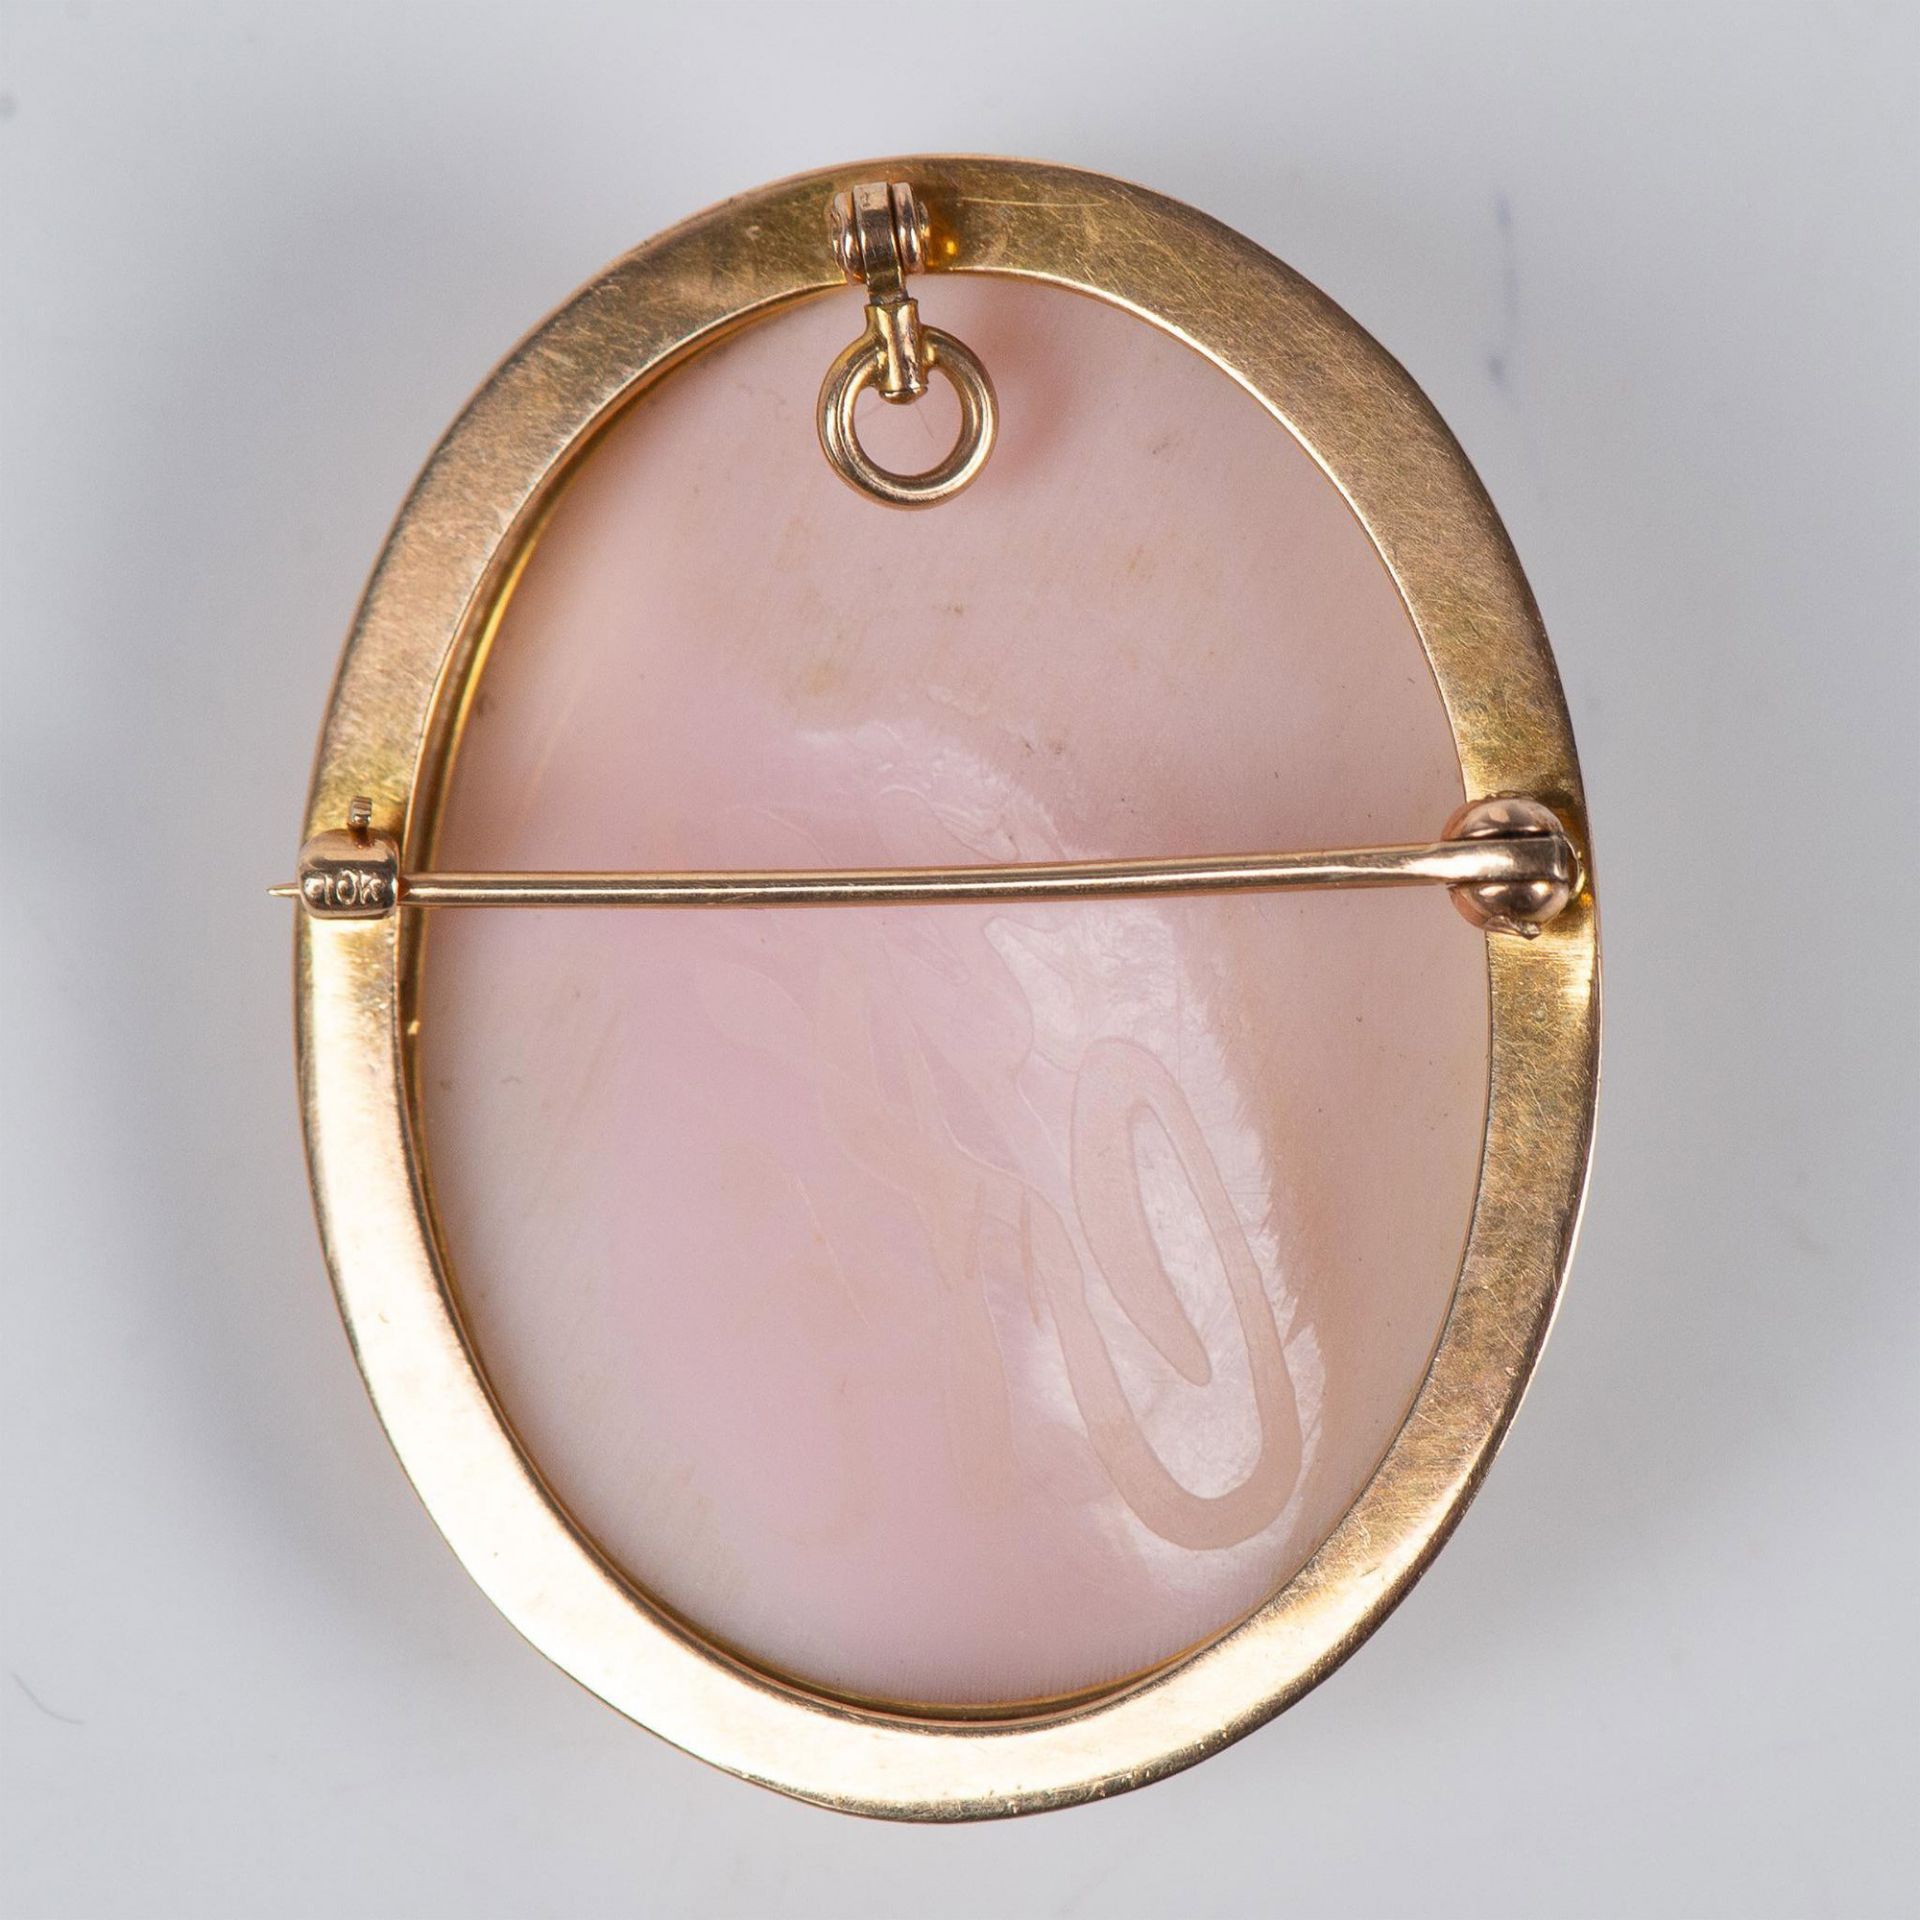 10K Gold Cameo Brooch-Pendant - Image 2 of 3